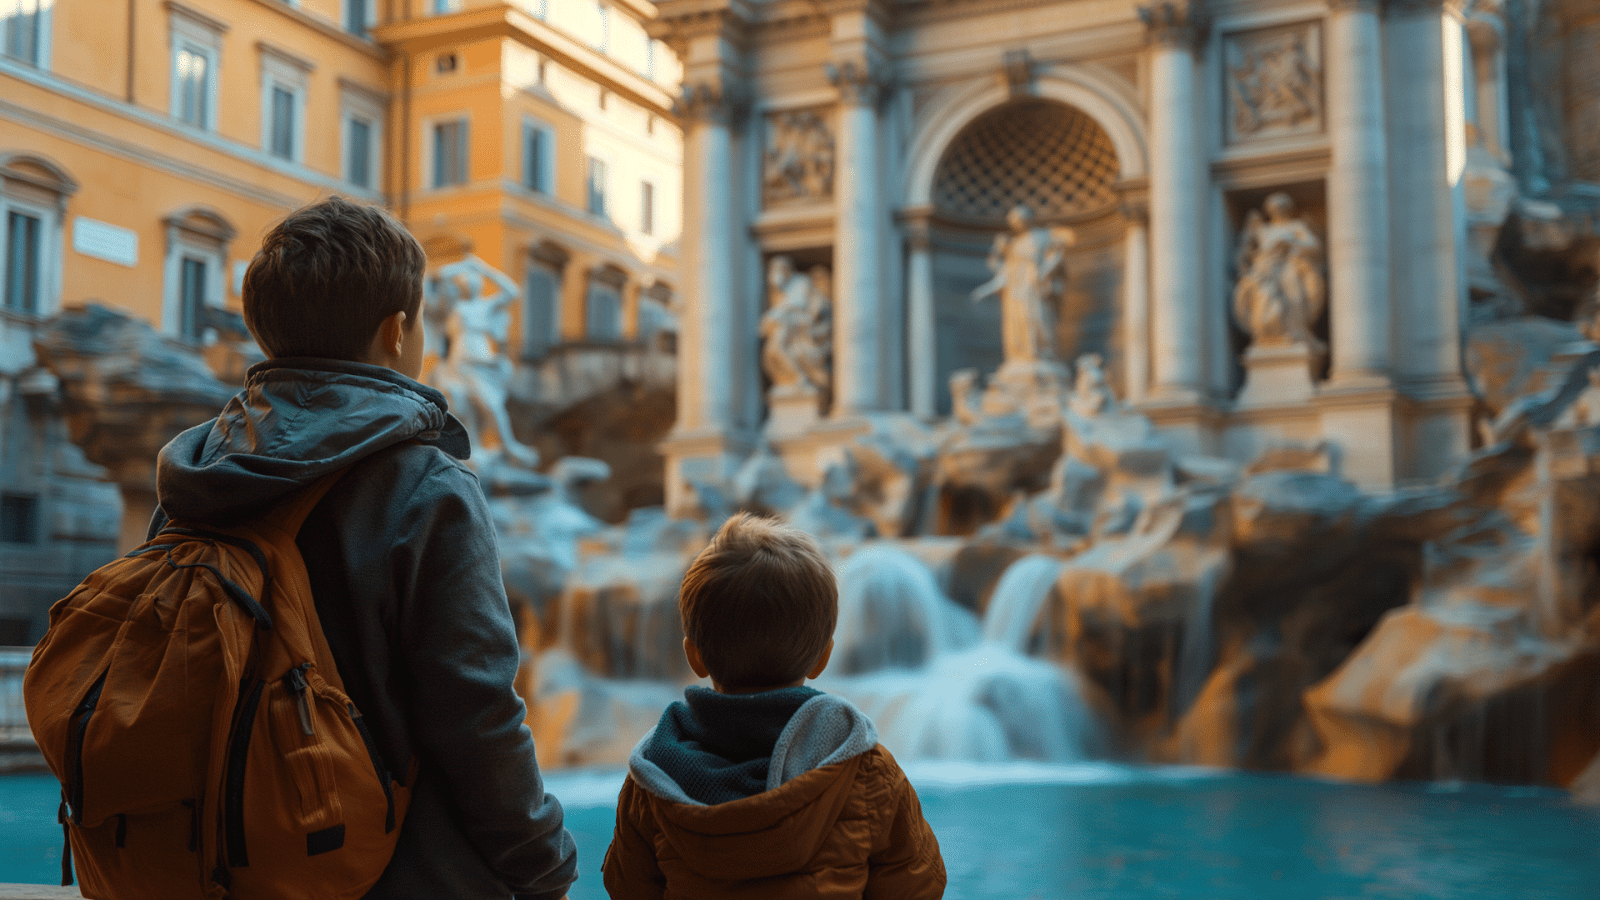 Two kids mesmerized by Trevi Fountain, a moment before tossing coins